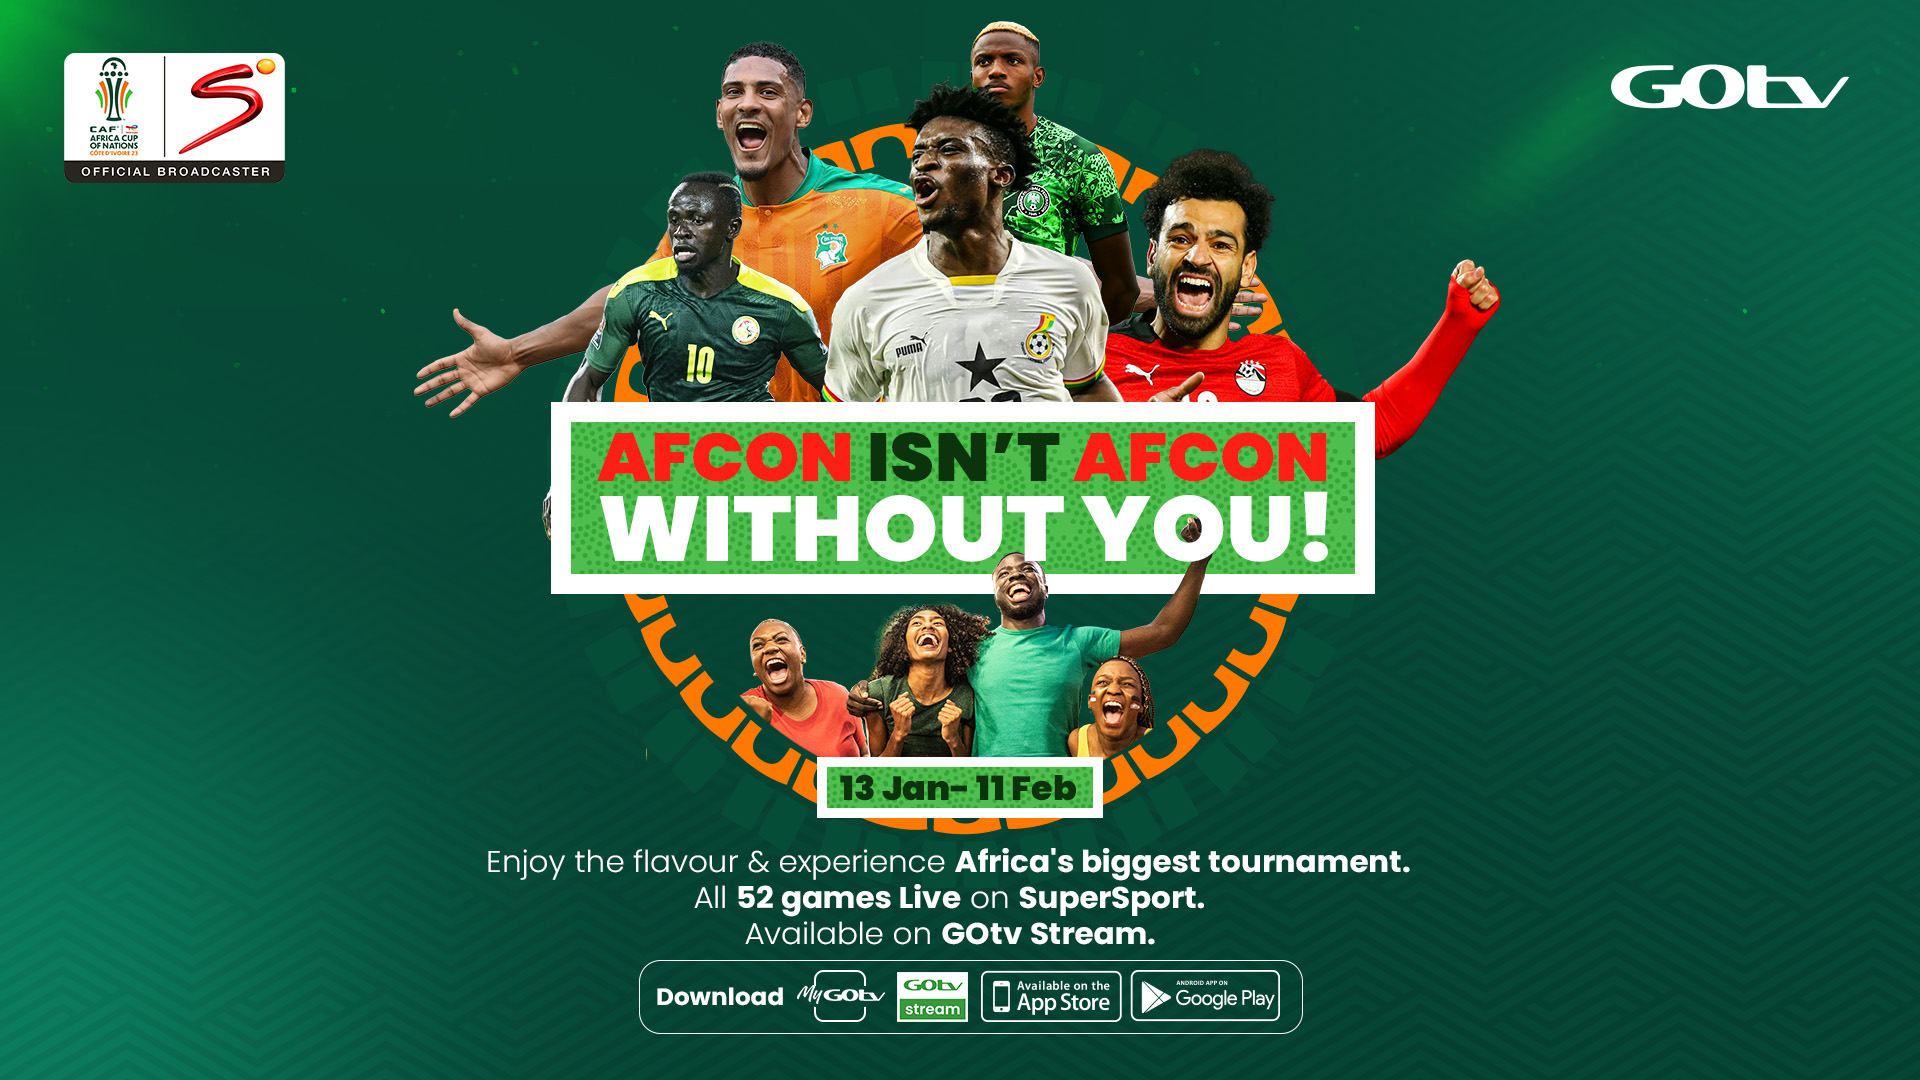 AFCON isn't AFCON without you – catch all 52 matches live on GOtv!